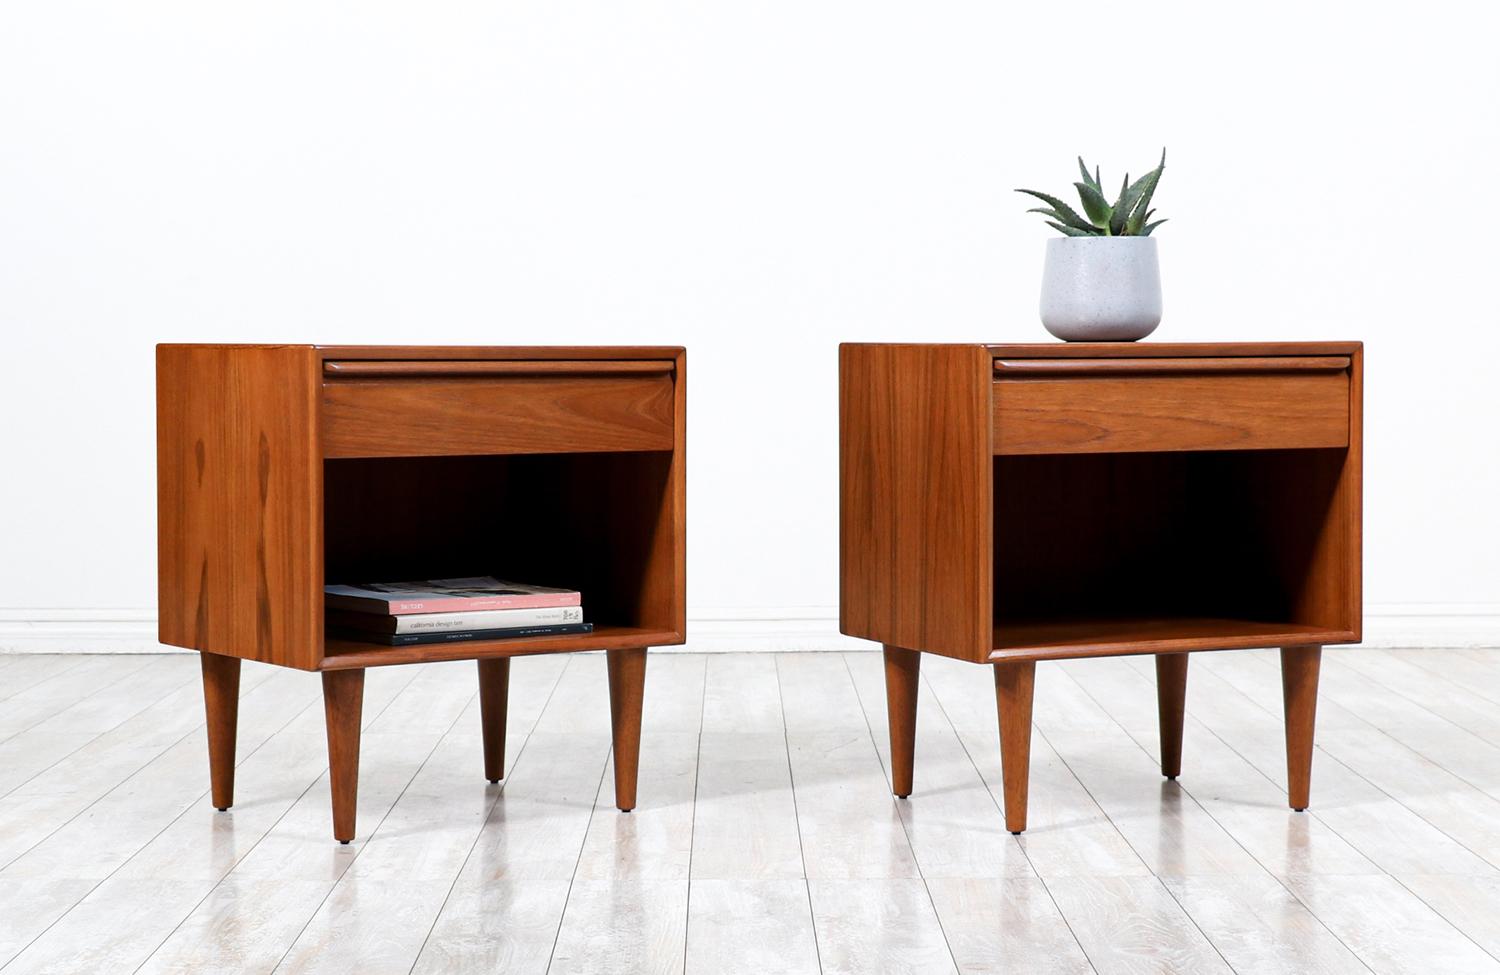 Scandinavian Modern Night Stands manufactured in Norway by Westnofa Furniture circa 1960’s. This pair of beautiful nightstands features a teak case sitting on solid tapered legs. Both items contain a dovetailed drawer with a sculpted handle and an